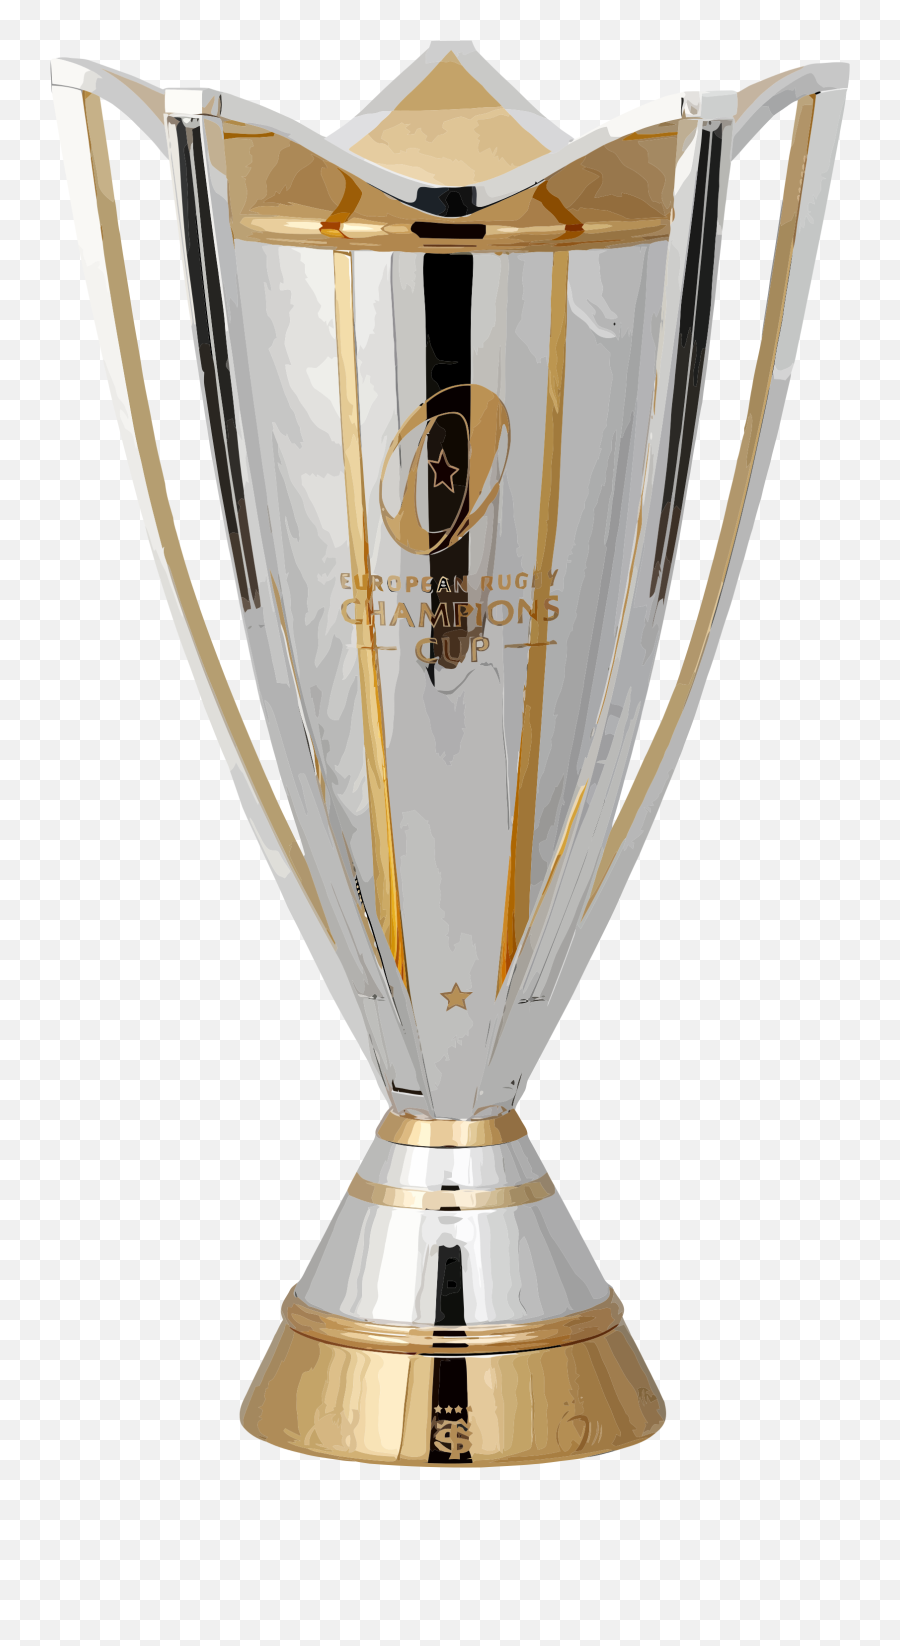 Europa League Trophy Png 3 Image - European Rugby Champions Cup Trophy,Trophy Png